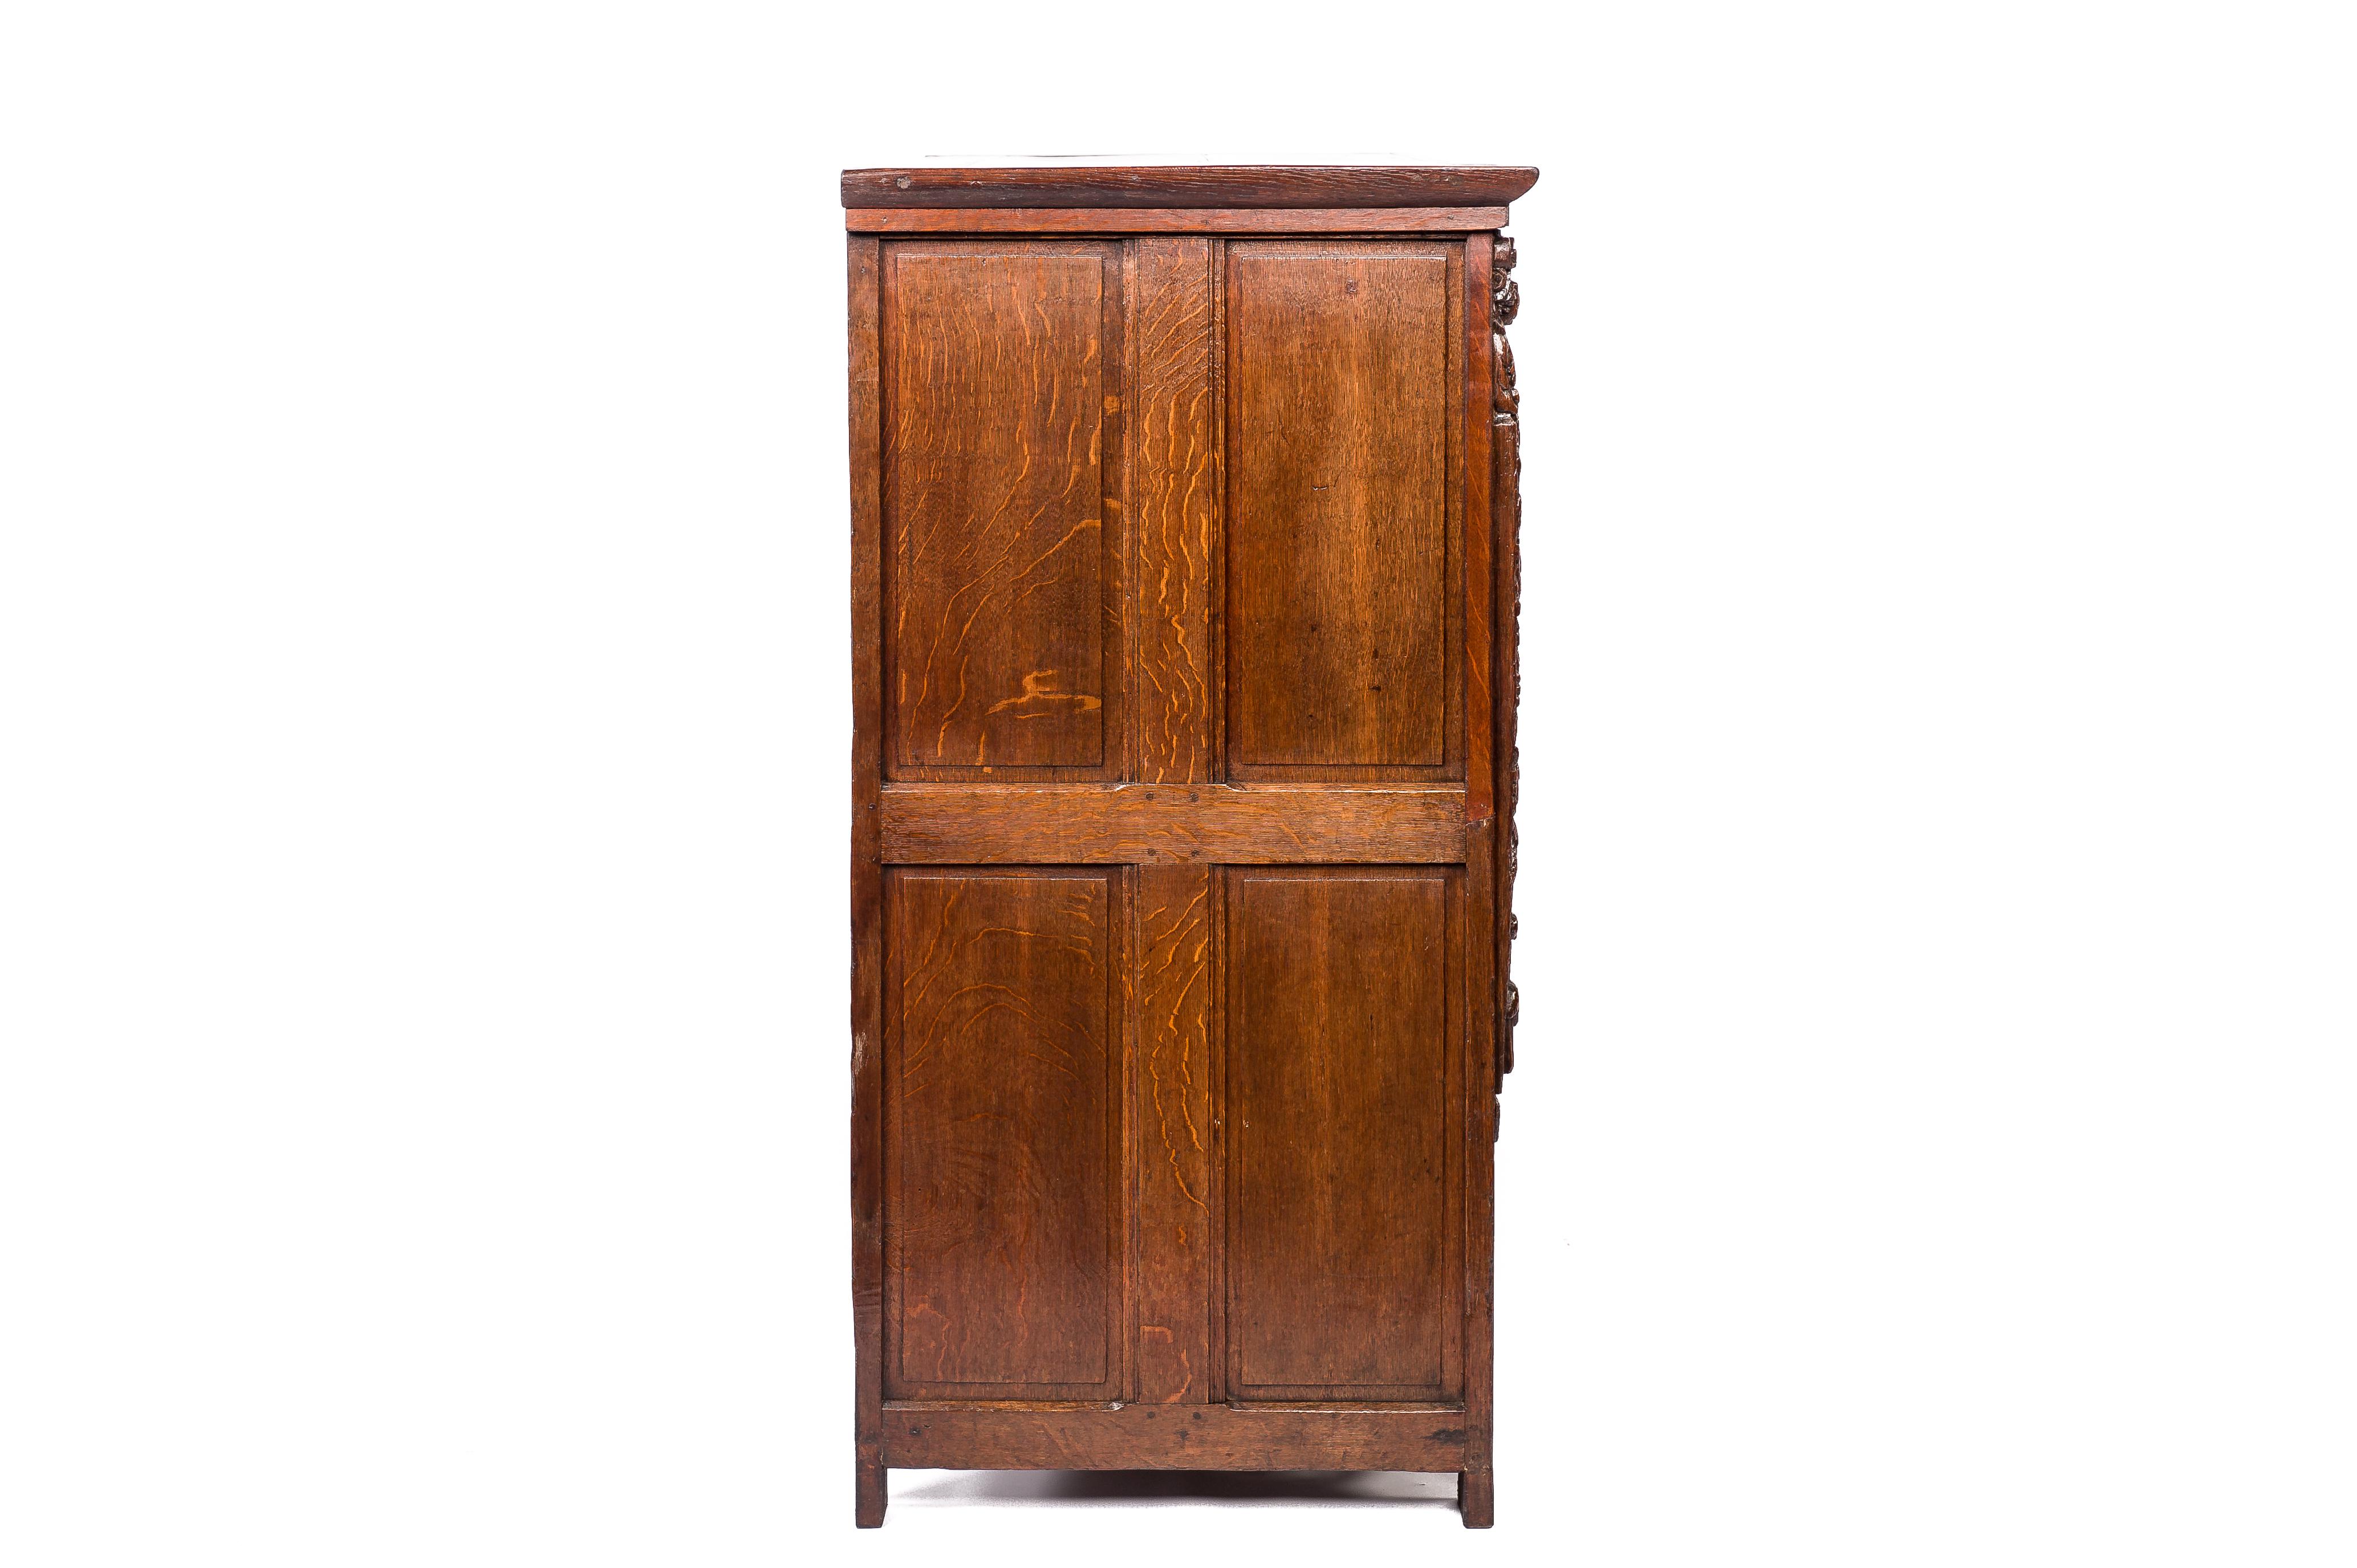 On offer here is an Exquisite 17th Century Oak Two-Door Cabinet from the Carmelite Monastery in Bruges, Belgium. This antique piece, crafted in the Southern Netherlands around 1635, is a true gem. Constructed from the finest quality European summer